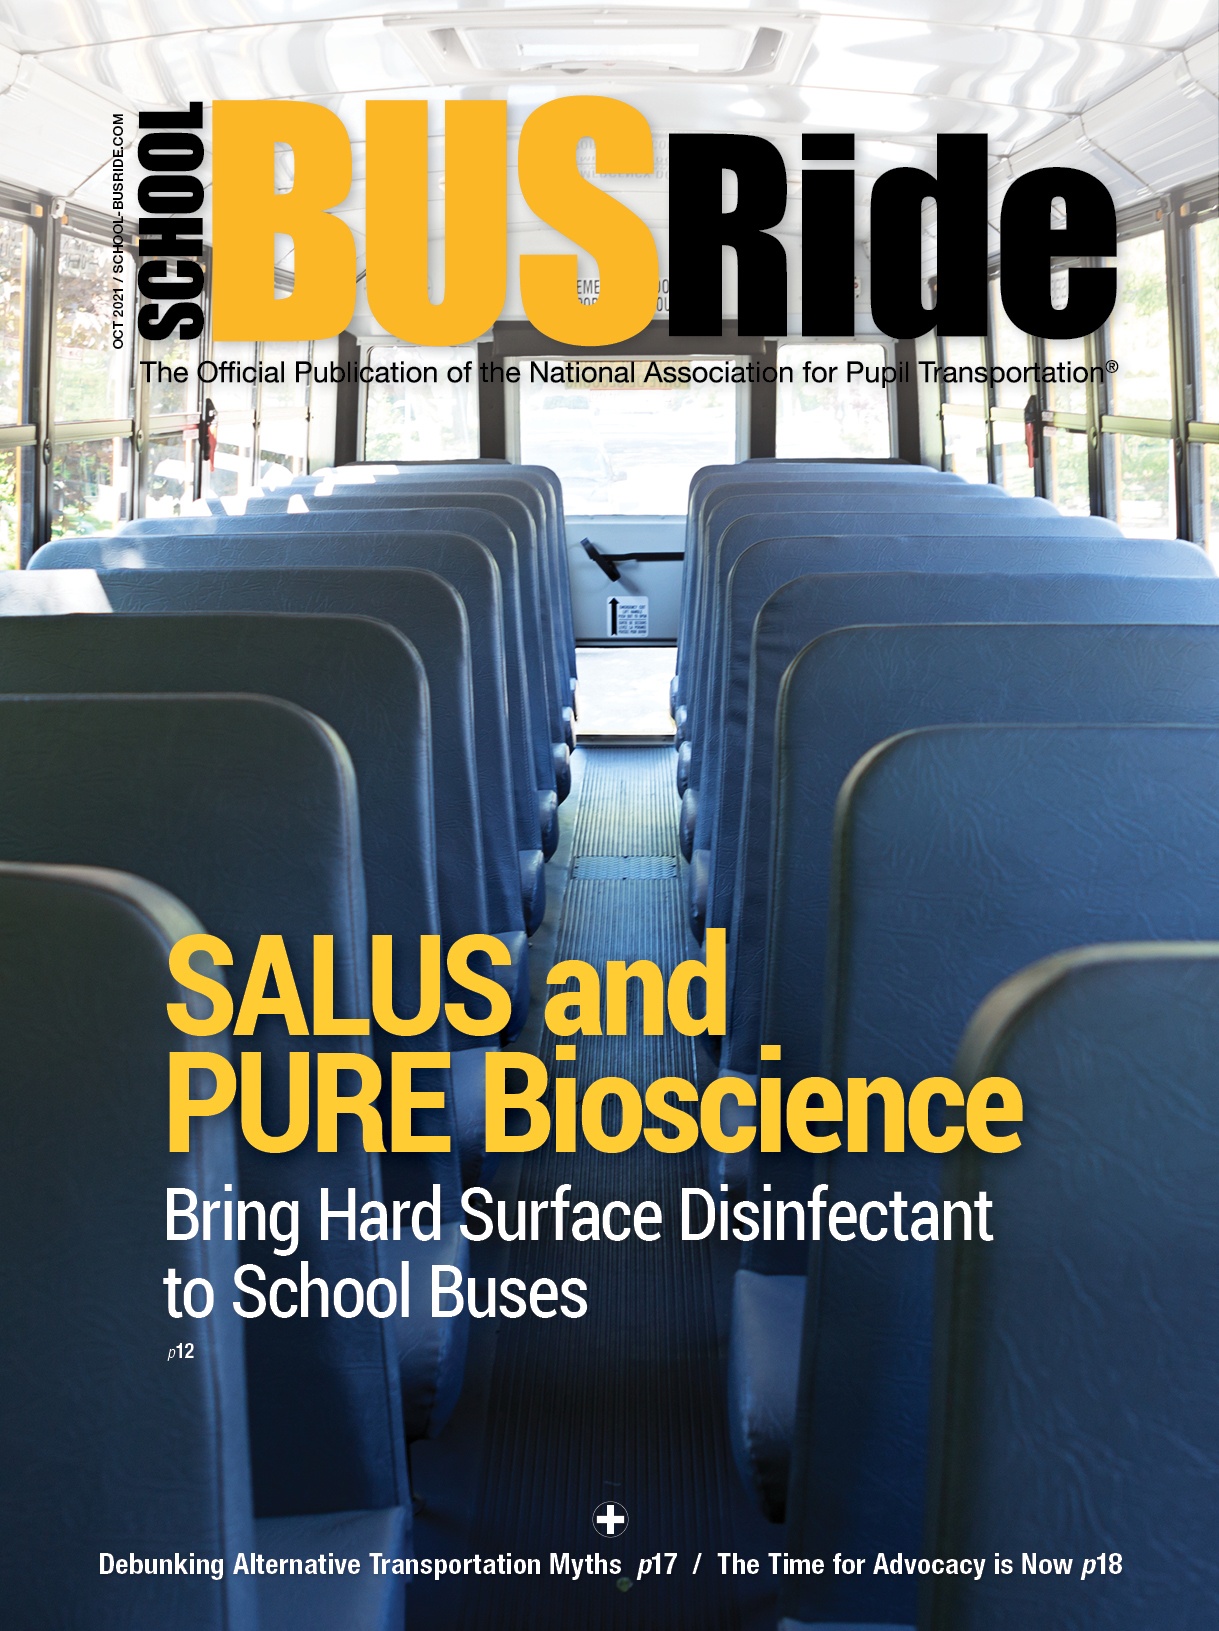 Salus Product Group and PURE Bioscience Bring Hard Surface Disinfectant to School Buses